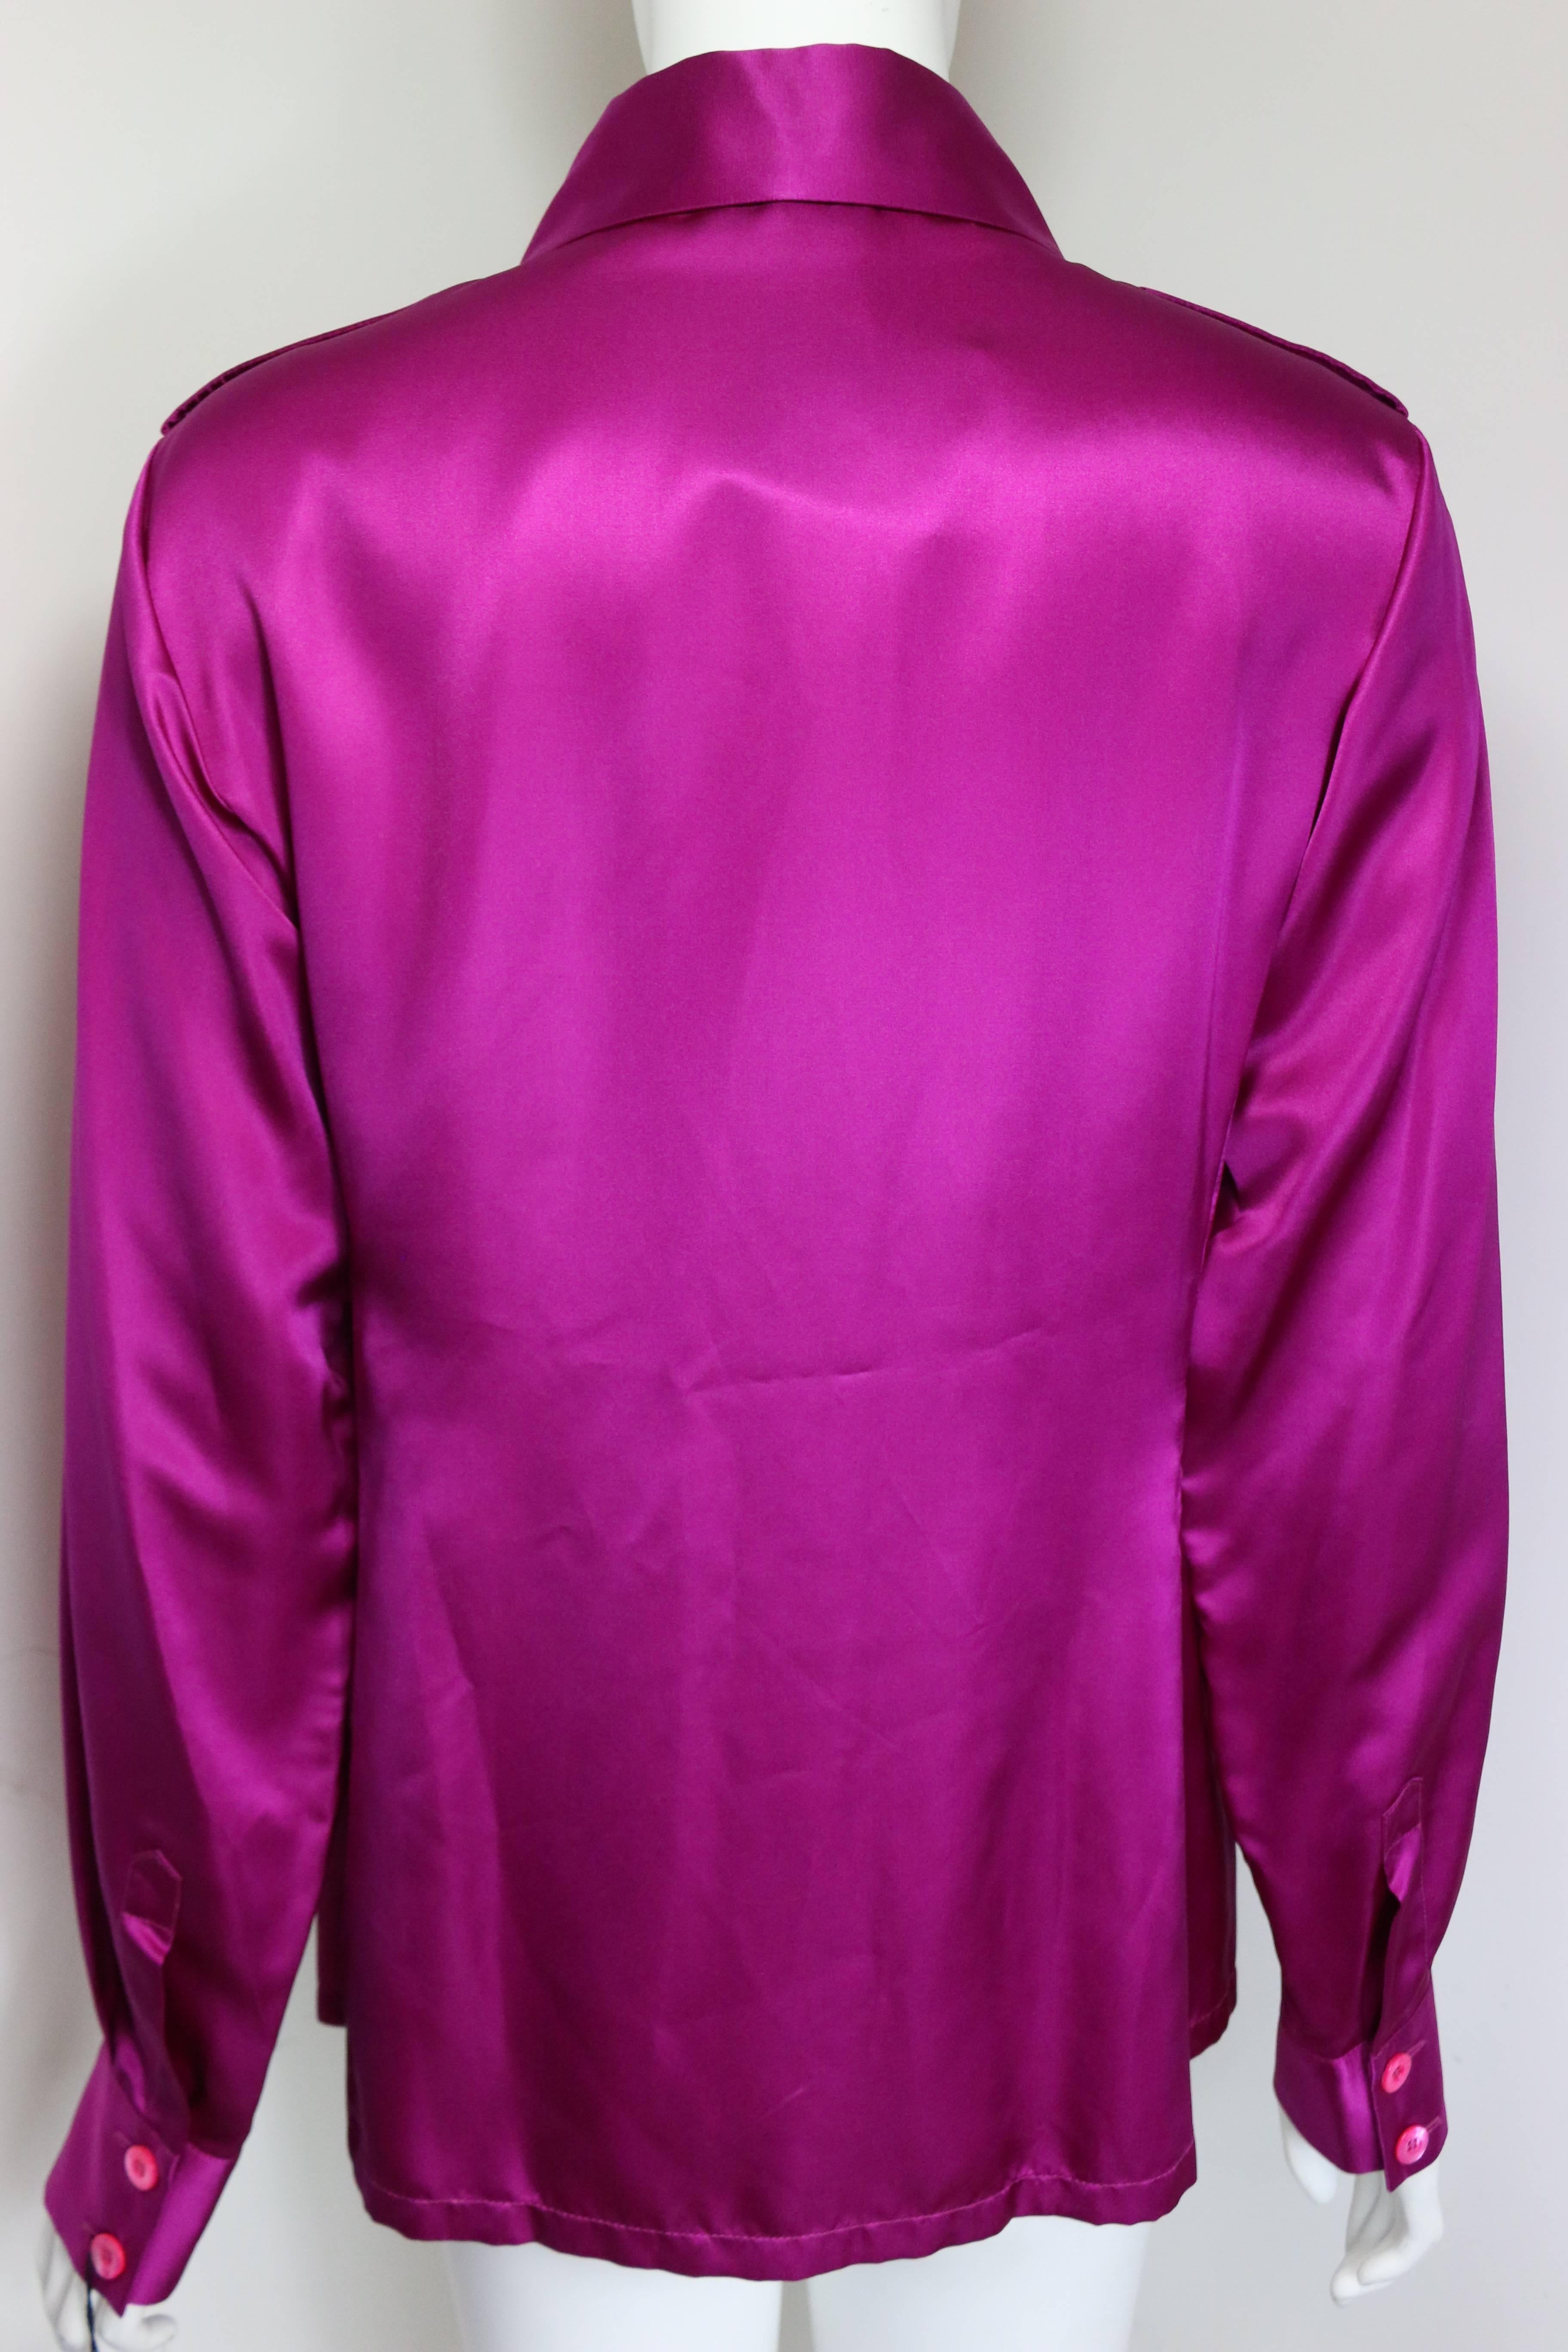 - Gucci by Tom Ford pink satin silk shirt from his debut fall 1995 collection. This collection really marks his name in the fashion industry. This collection has redefined what sexiness is!!! 

- Featuring epaulettes on the shoulders with pink